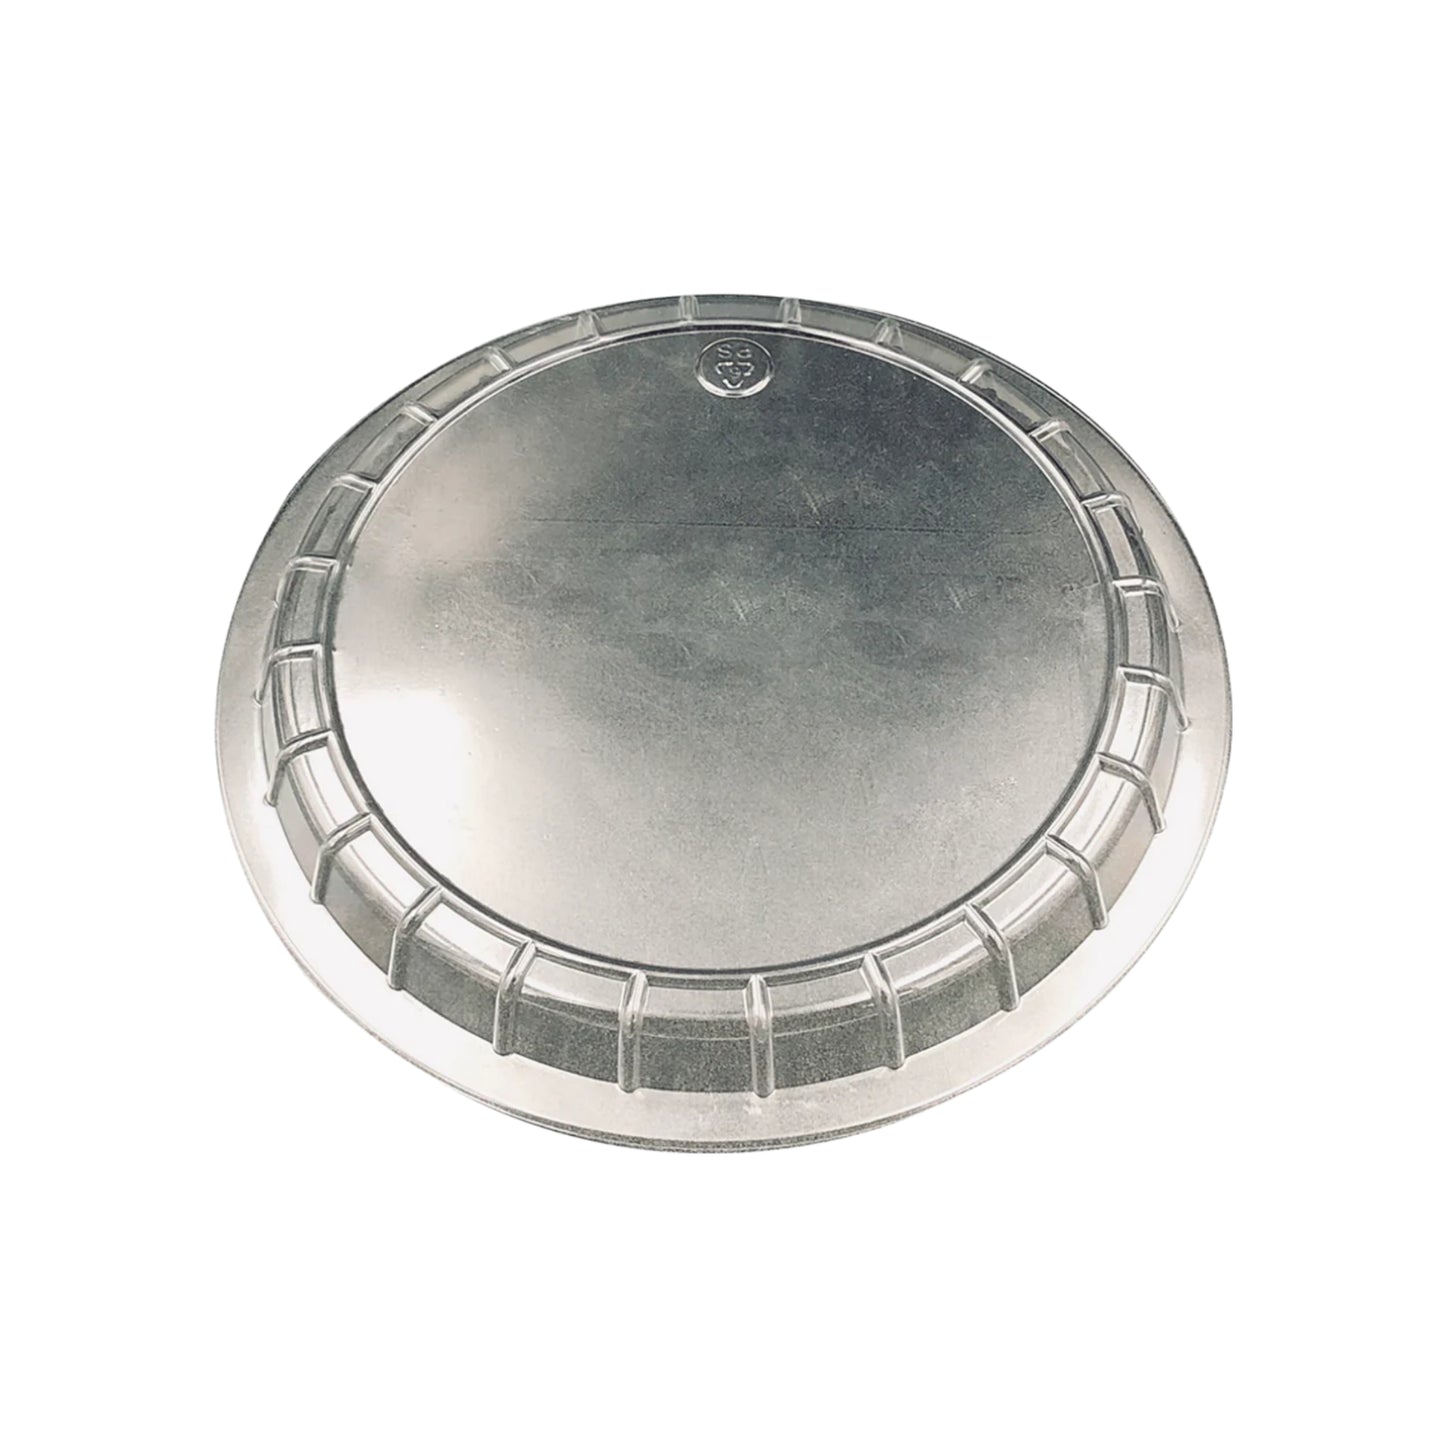 KIS-DL700G | 7" Plastic Dome Lids for Round Heavy Weight Aluminum Container; $0.081/pc